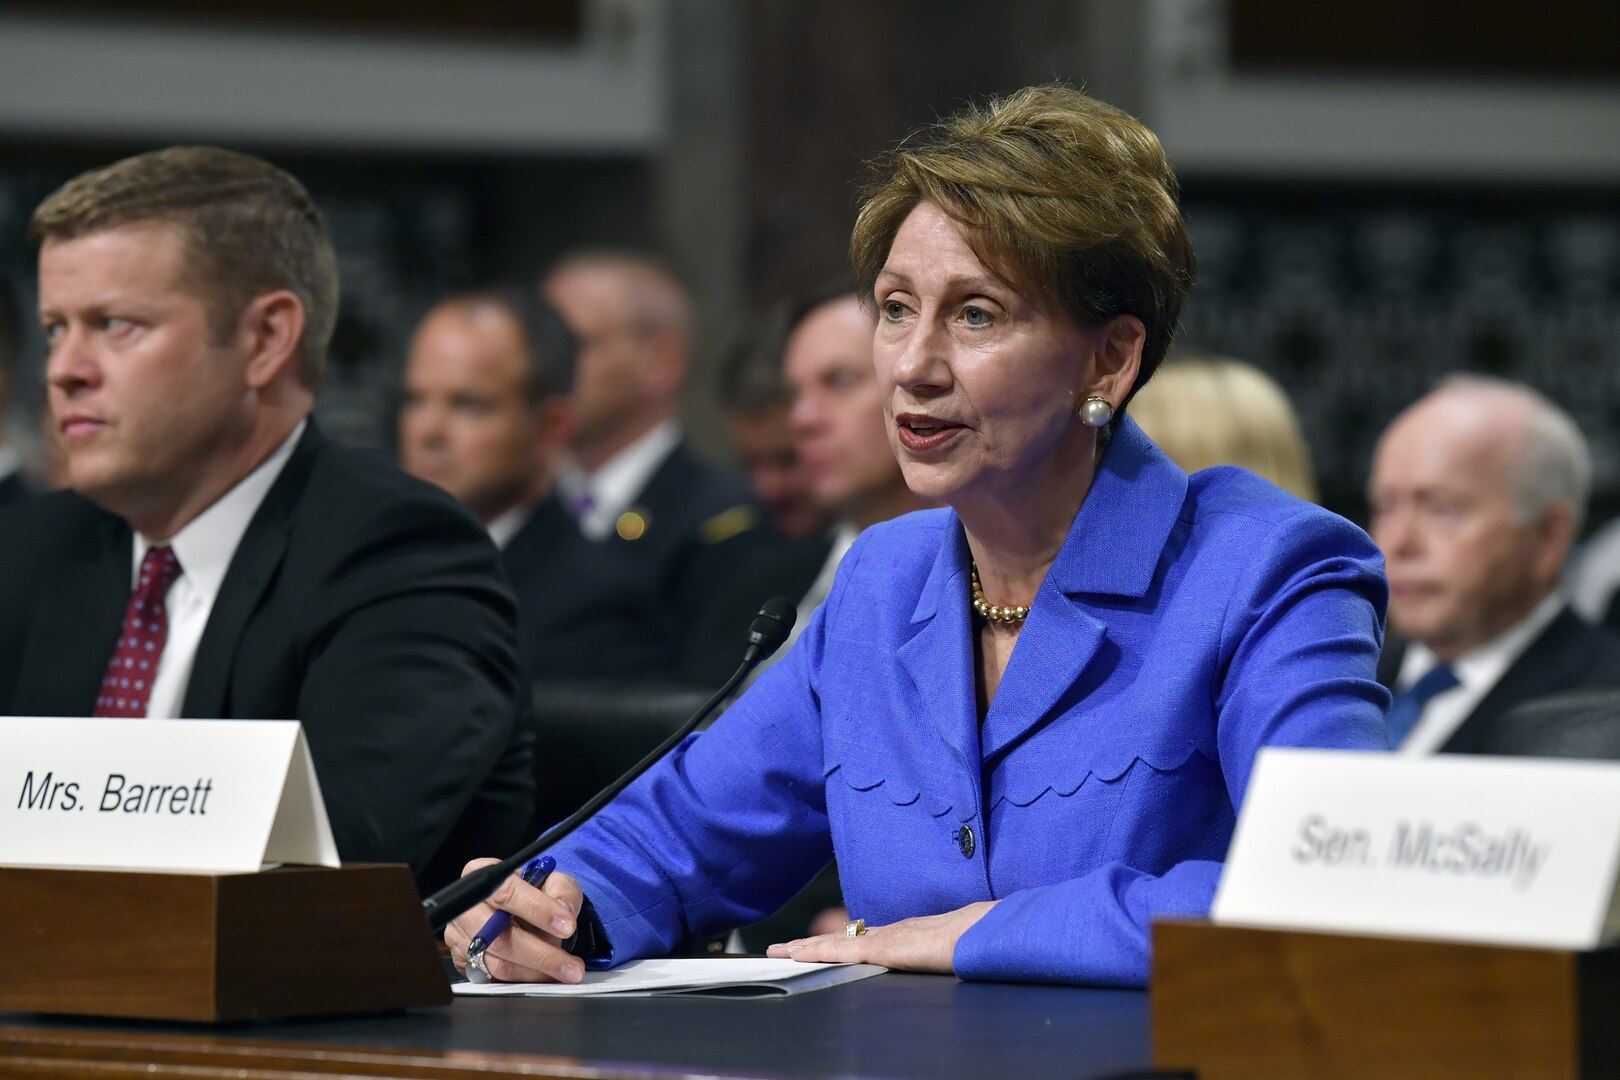 Barbara Barrett was confirmed by the Senate Oct. 16, 2019, to be the 25th Secretary of the Air Force. As an experienced pilot, former ambassador and senior government official, Barrett was praised for her wide experience and long history with aviation and the United States military.